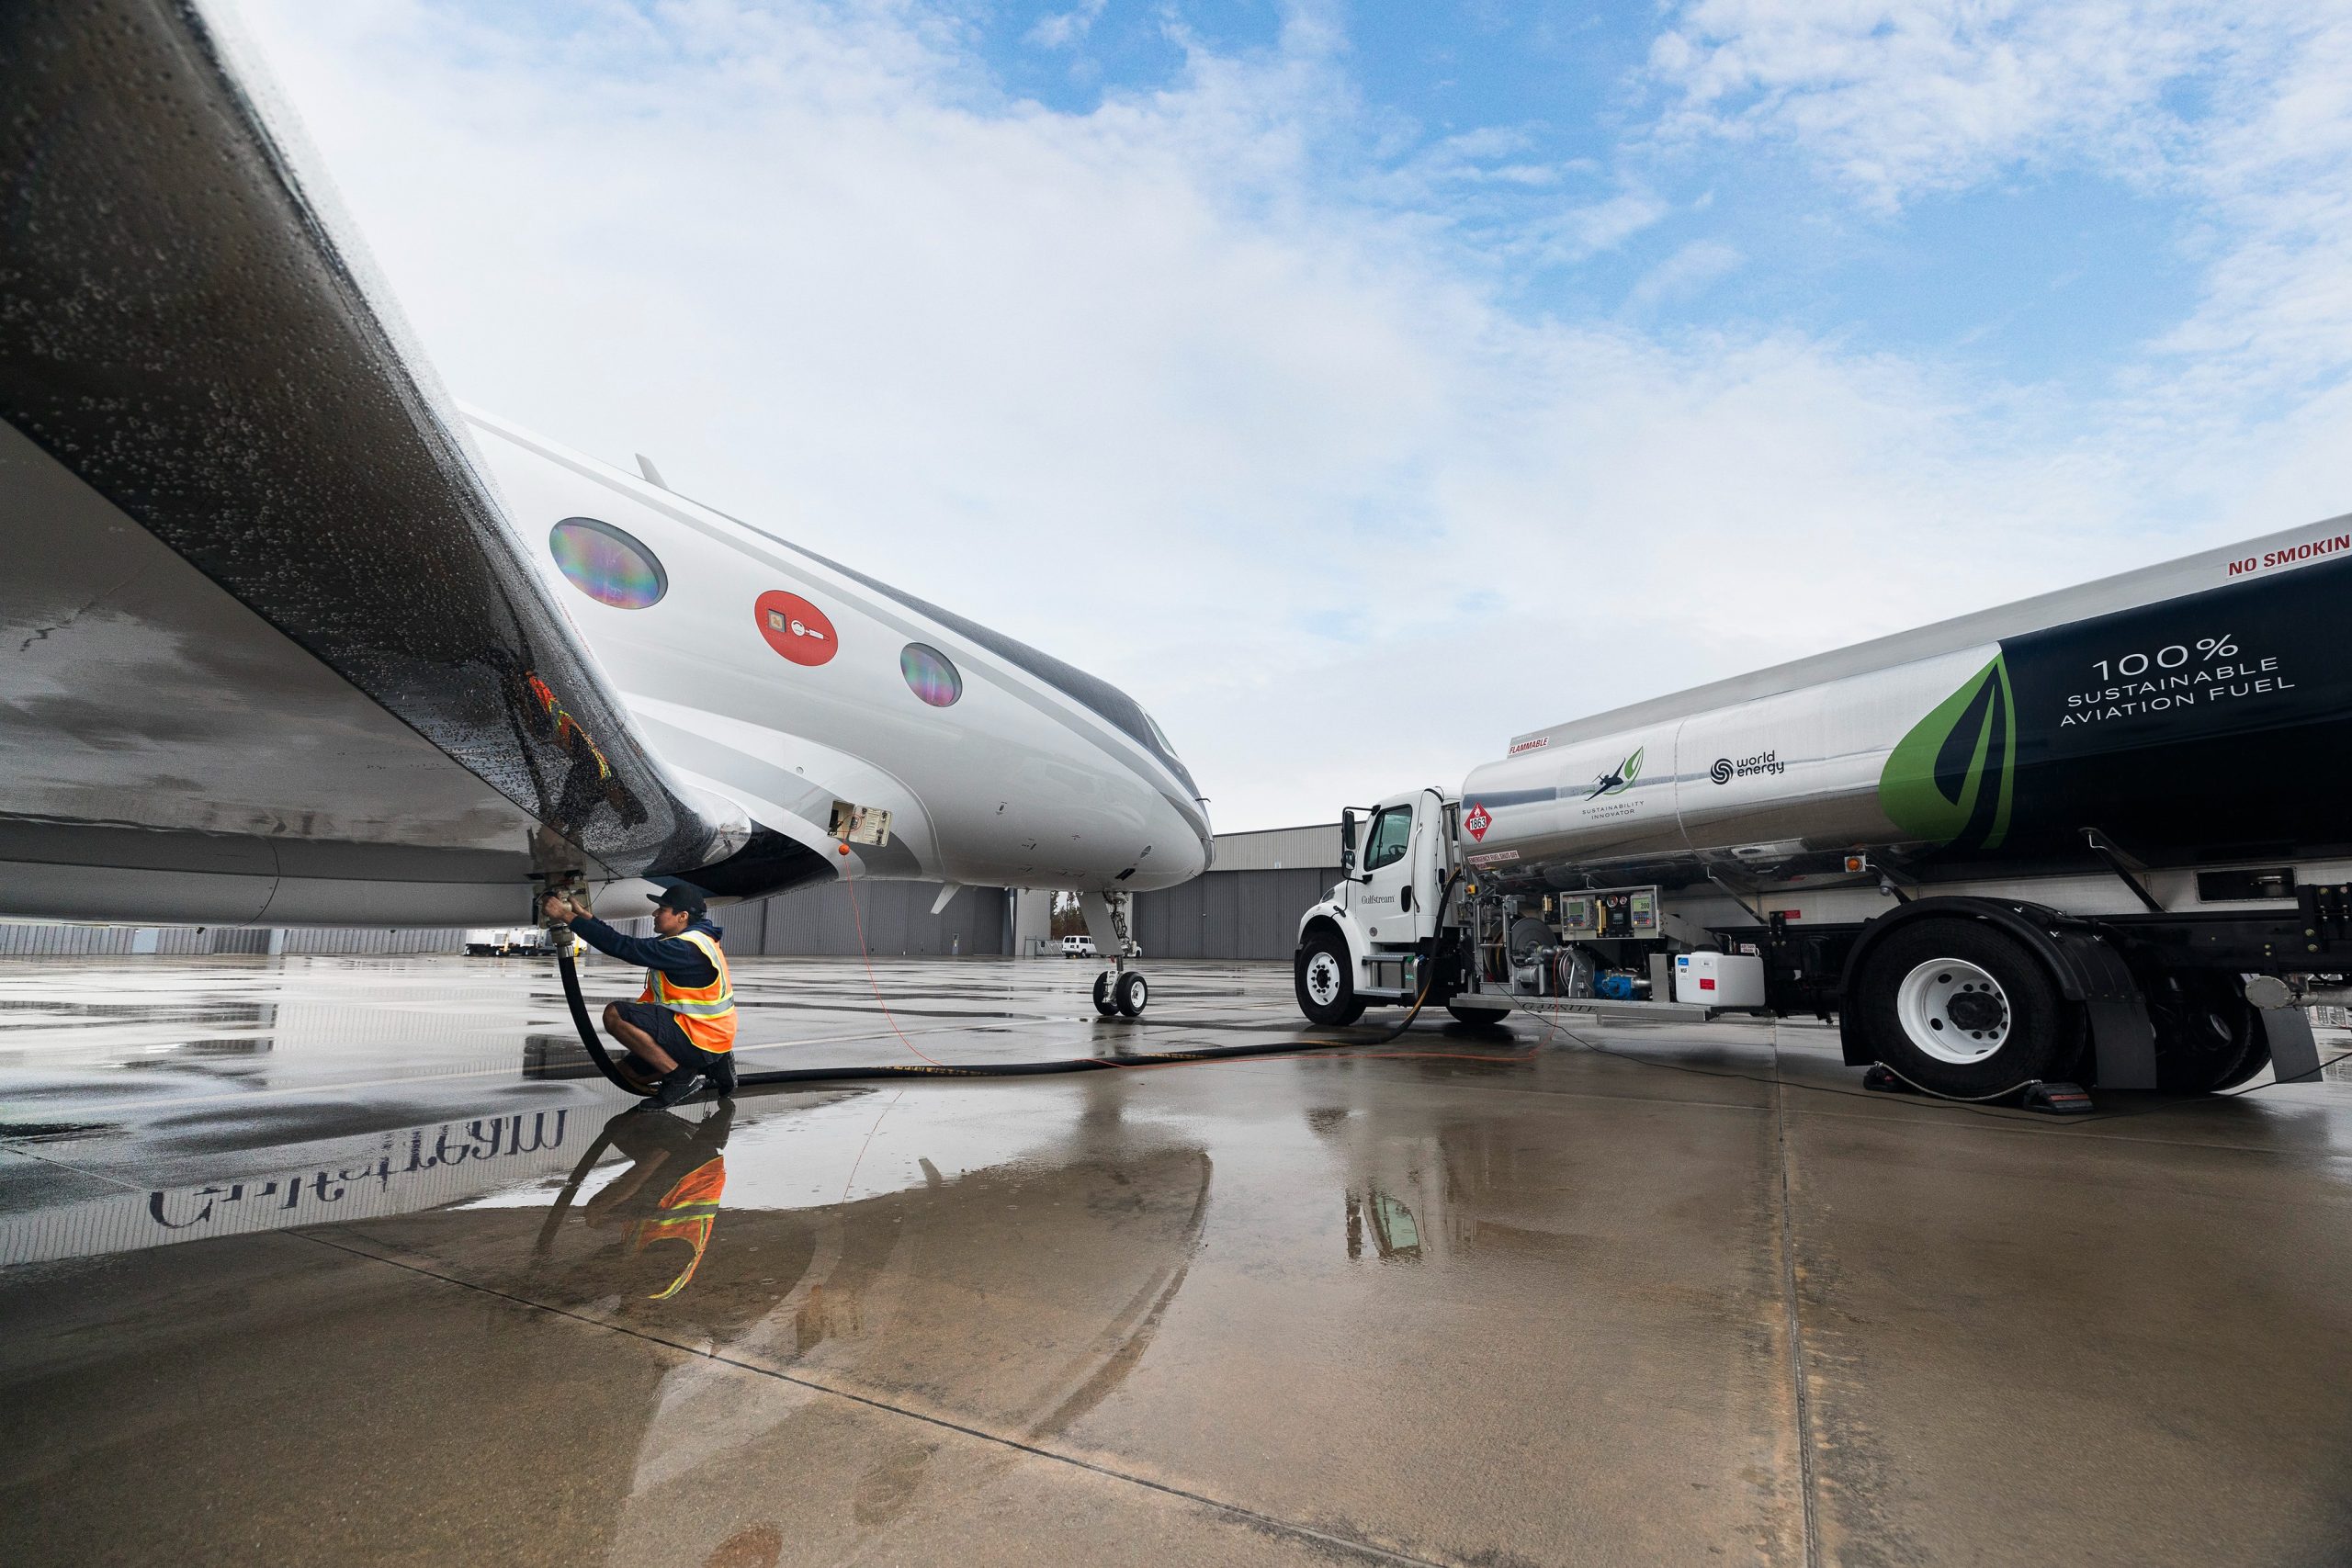 GULFSTREAM COMPLETES WORLD’S FIRST TRANS-ATLANTIC FLIGHT ON 100% SUSTAINABLE AVIATION FUEL